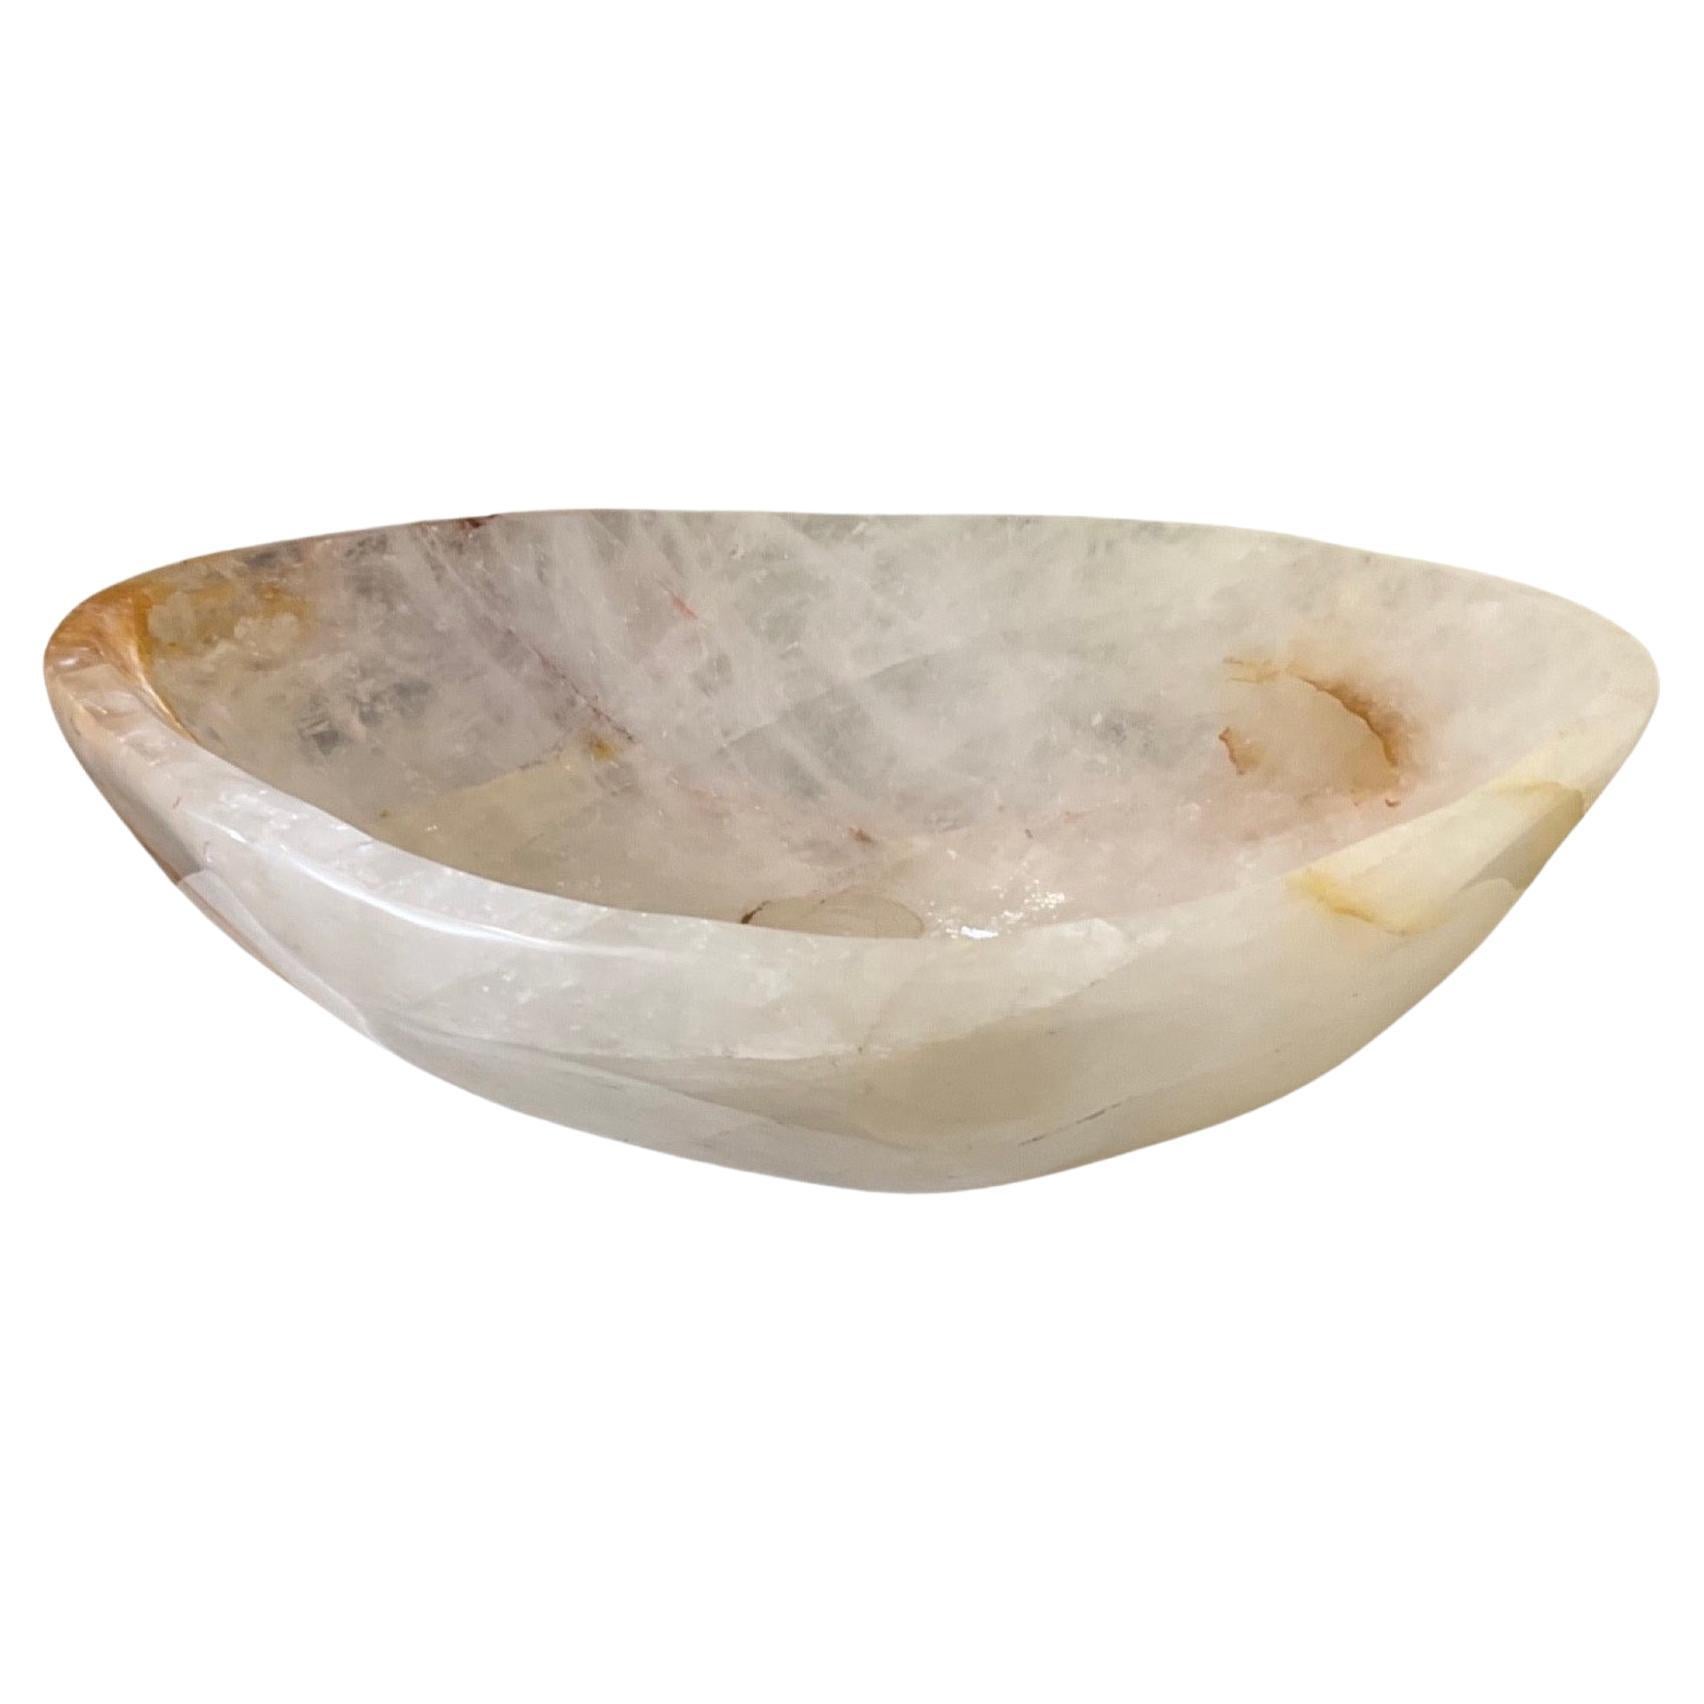 Our Brazilian rock crystal sink bowl adds an air of sophistication to any bathroom. Crafted from polished Brazilian Rock Crystal in 2010, this sink bowl combines aesthetic value and durability. Create an elegant focal point in your bathroom with